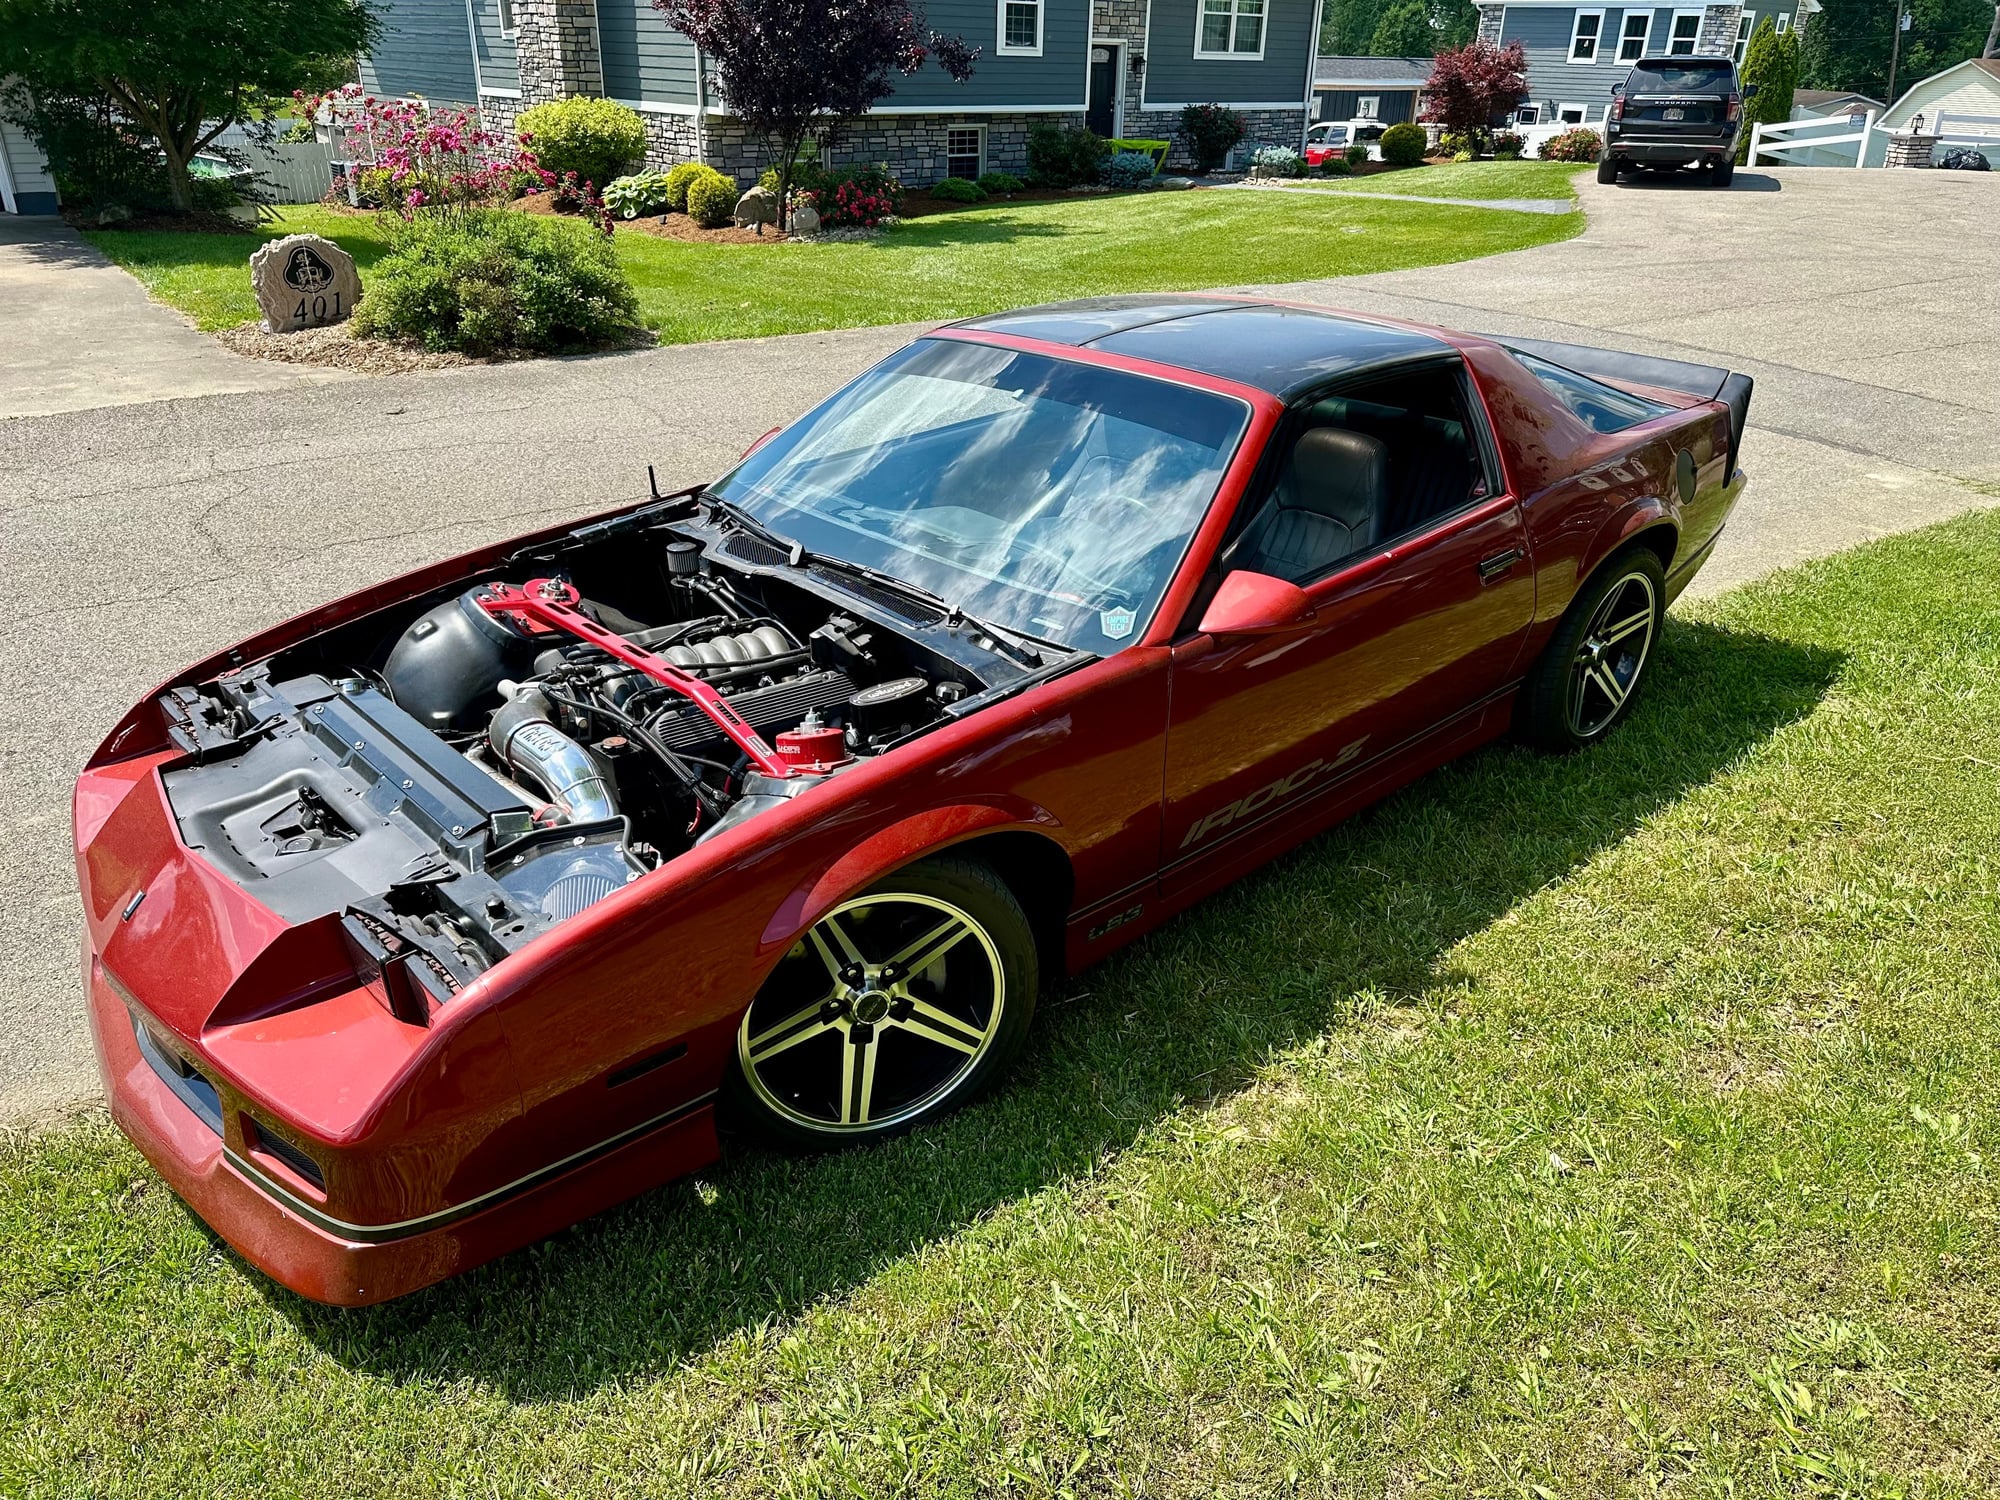 1986 Chevrolet Camaro - LS3/T56 swapped may trade - Used - Wheelersburg, OH 45694, United States